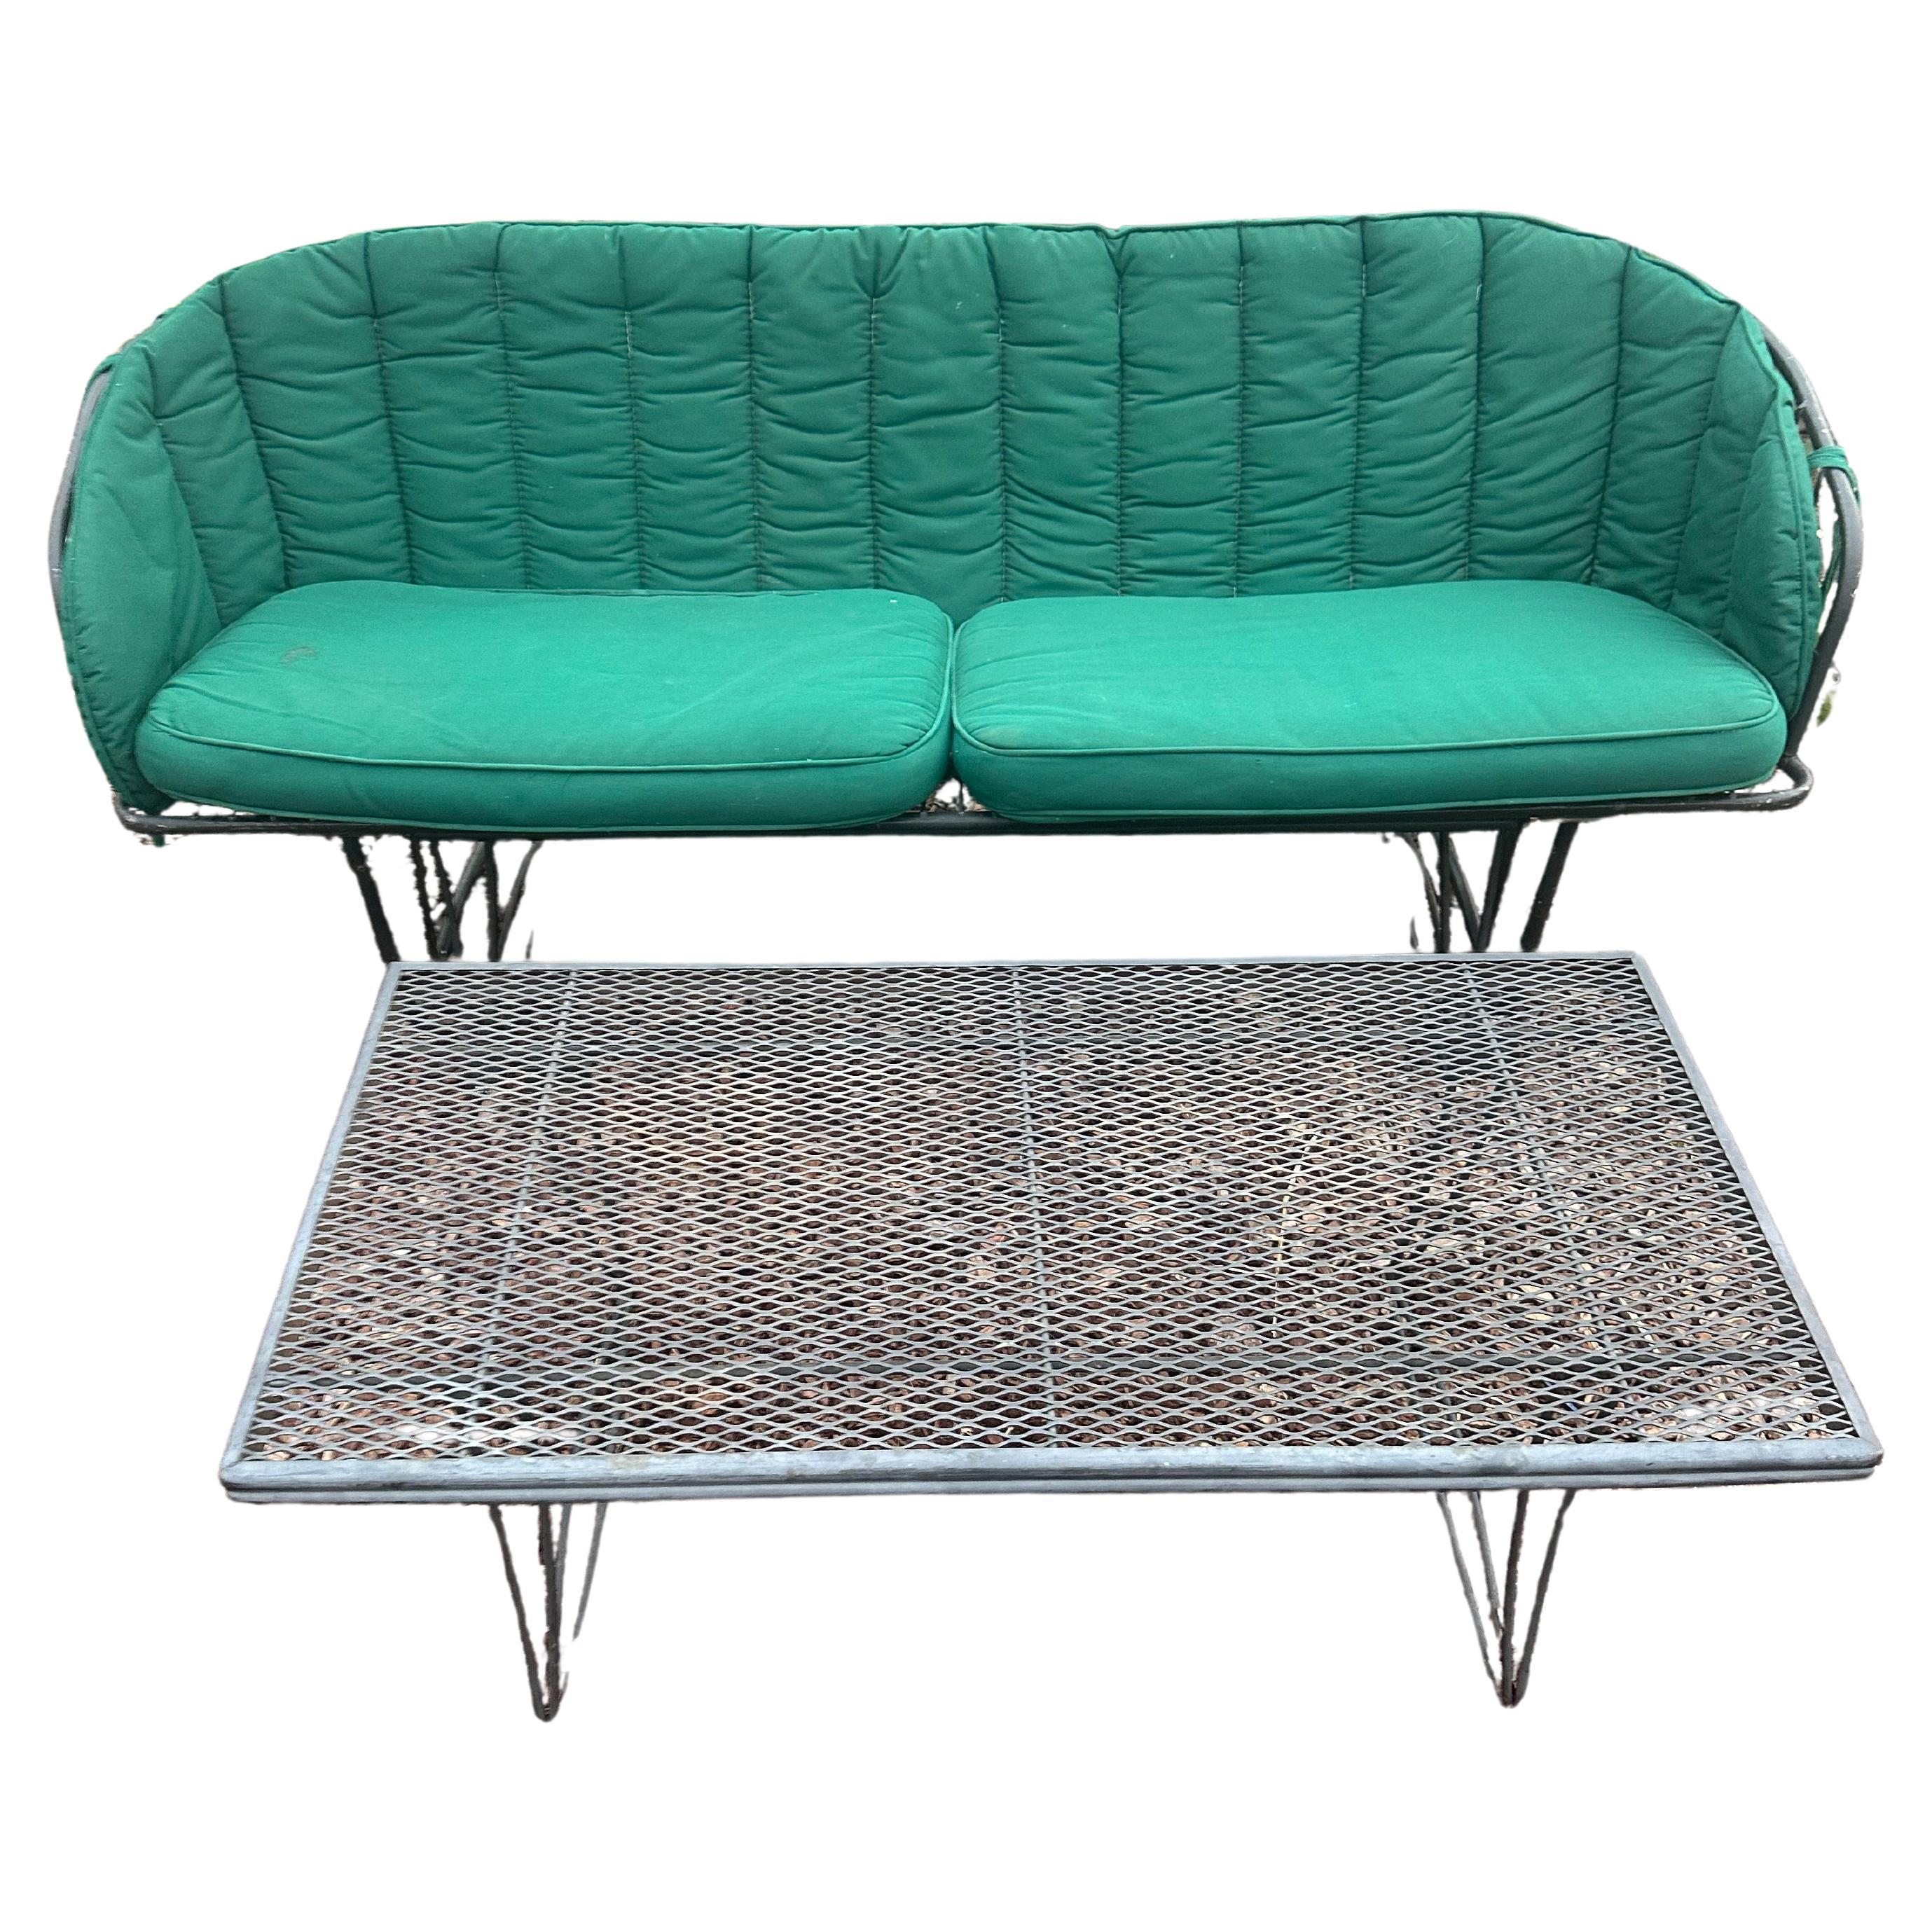 Homecrest Grenada loveseat Glider with cushions  and coffee table, Circa 1960’s For Sale